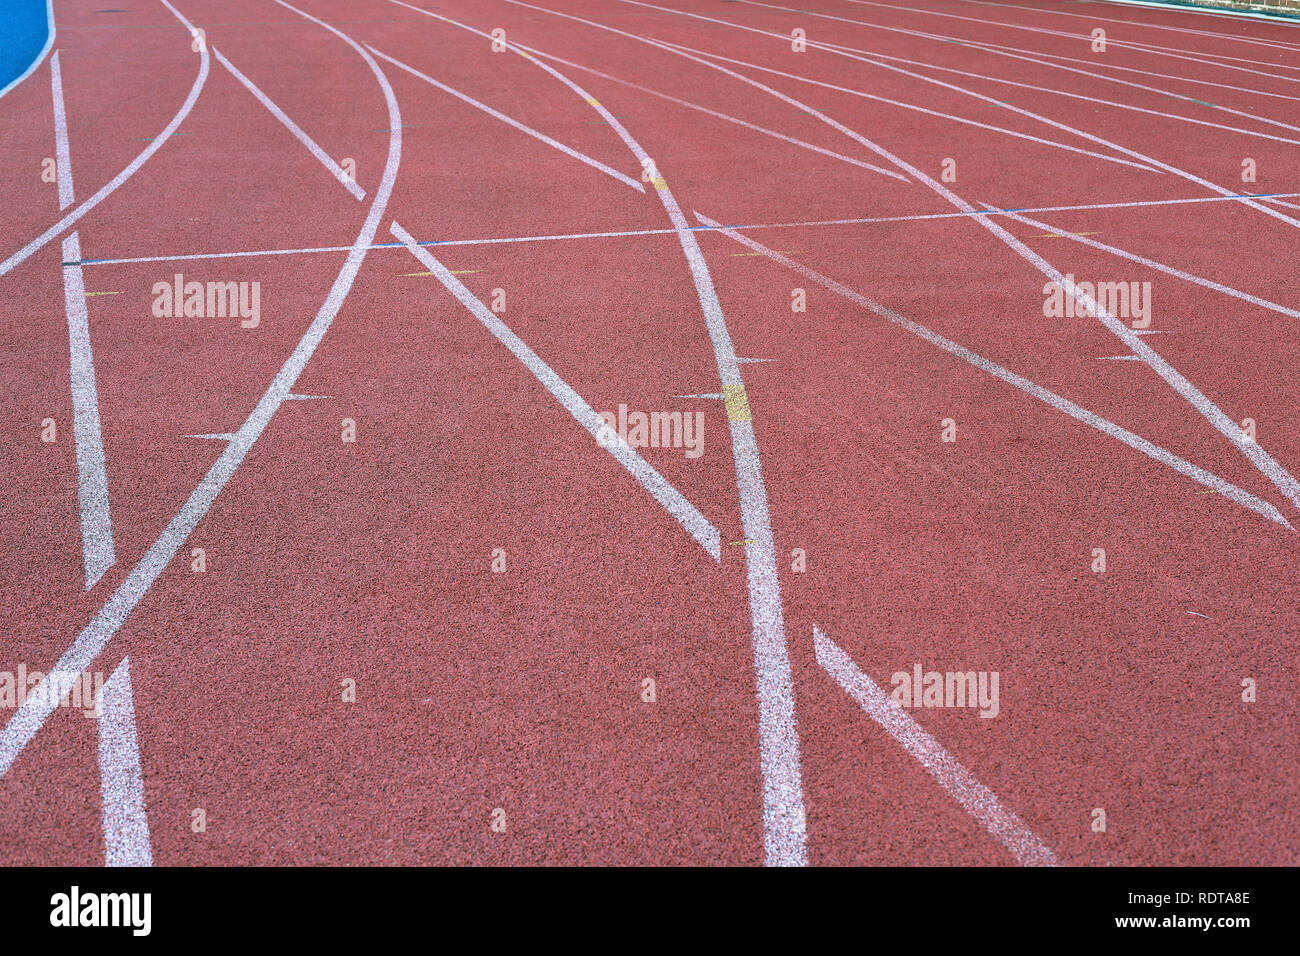 Track and Field Race Course intersecting Lines Stock Photo